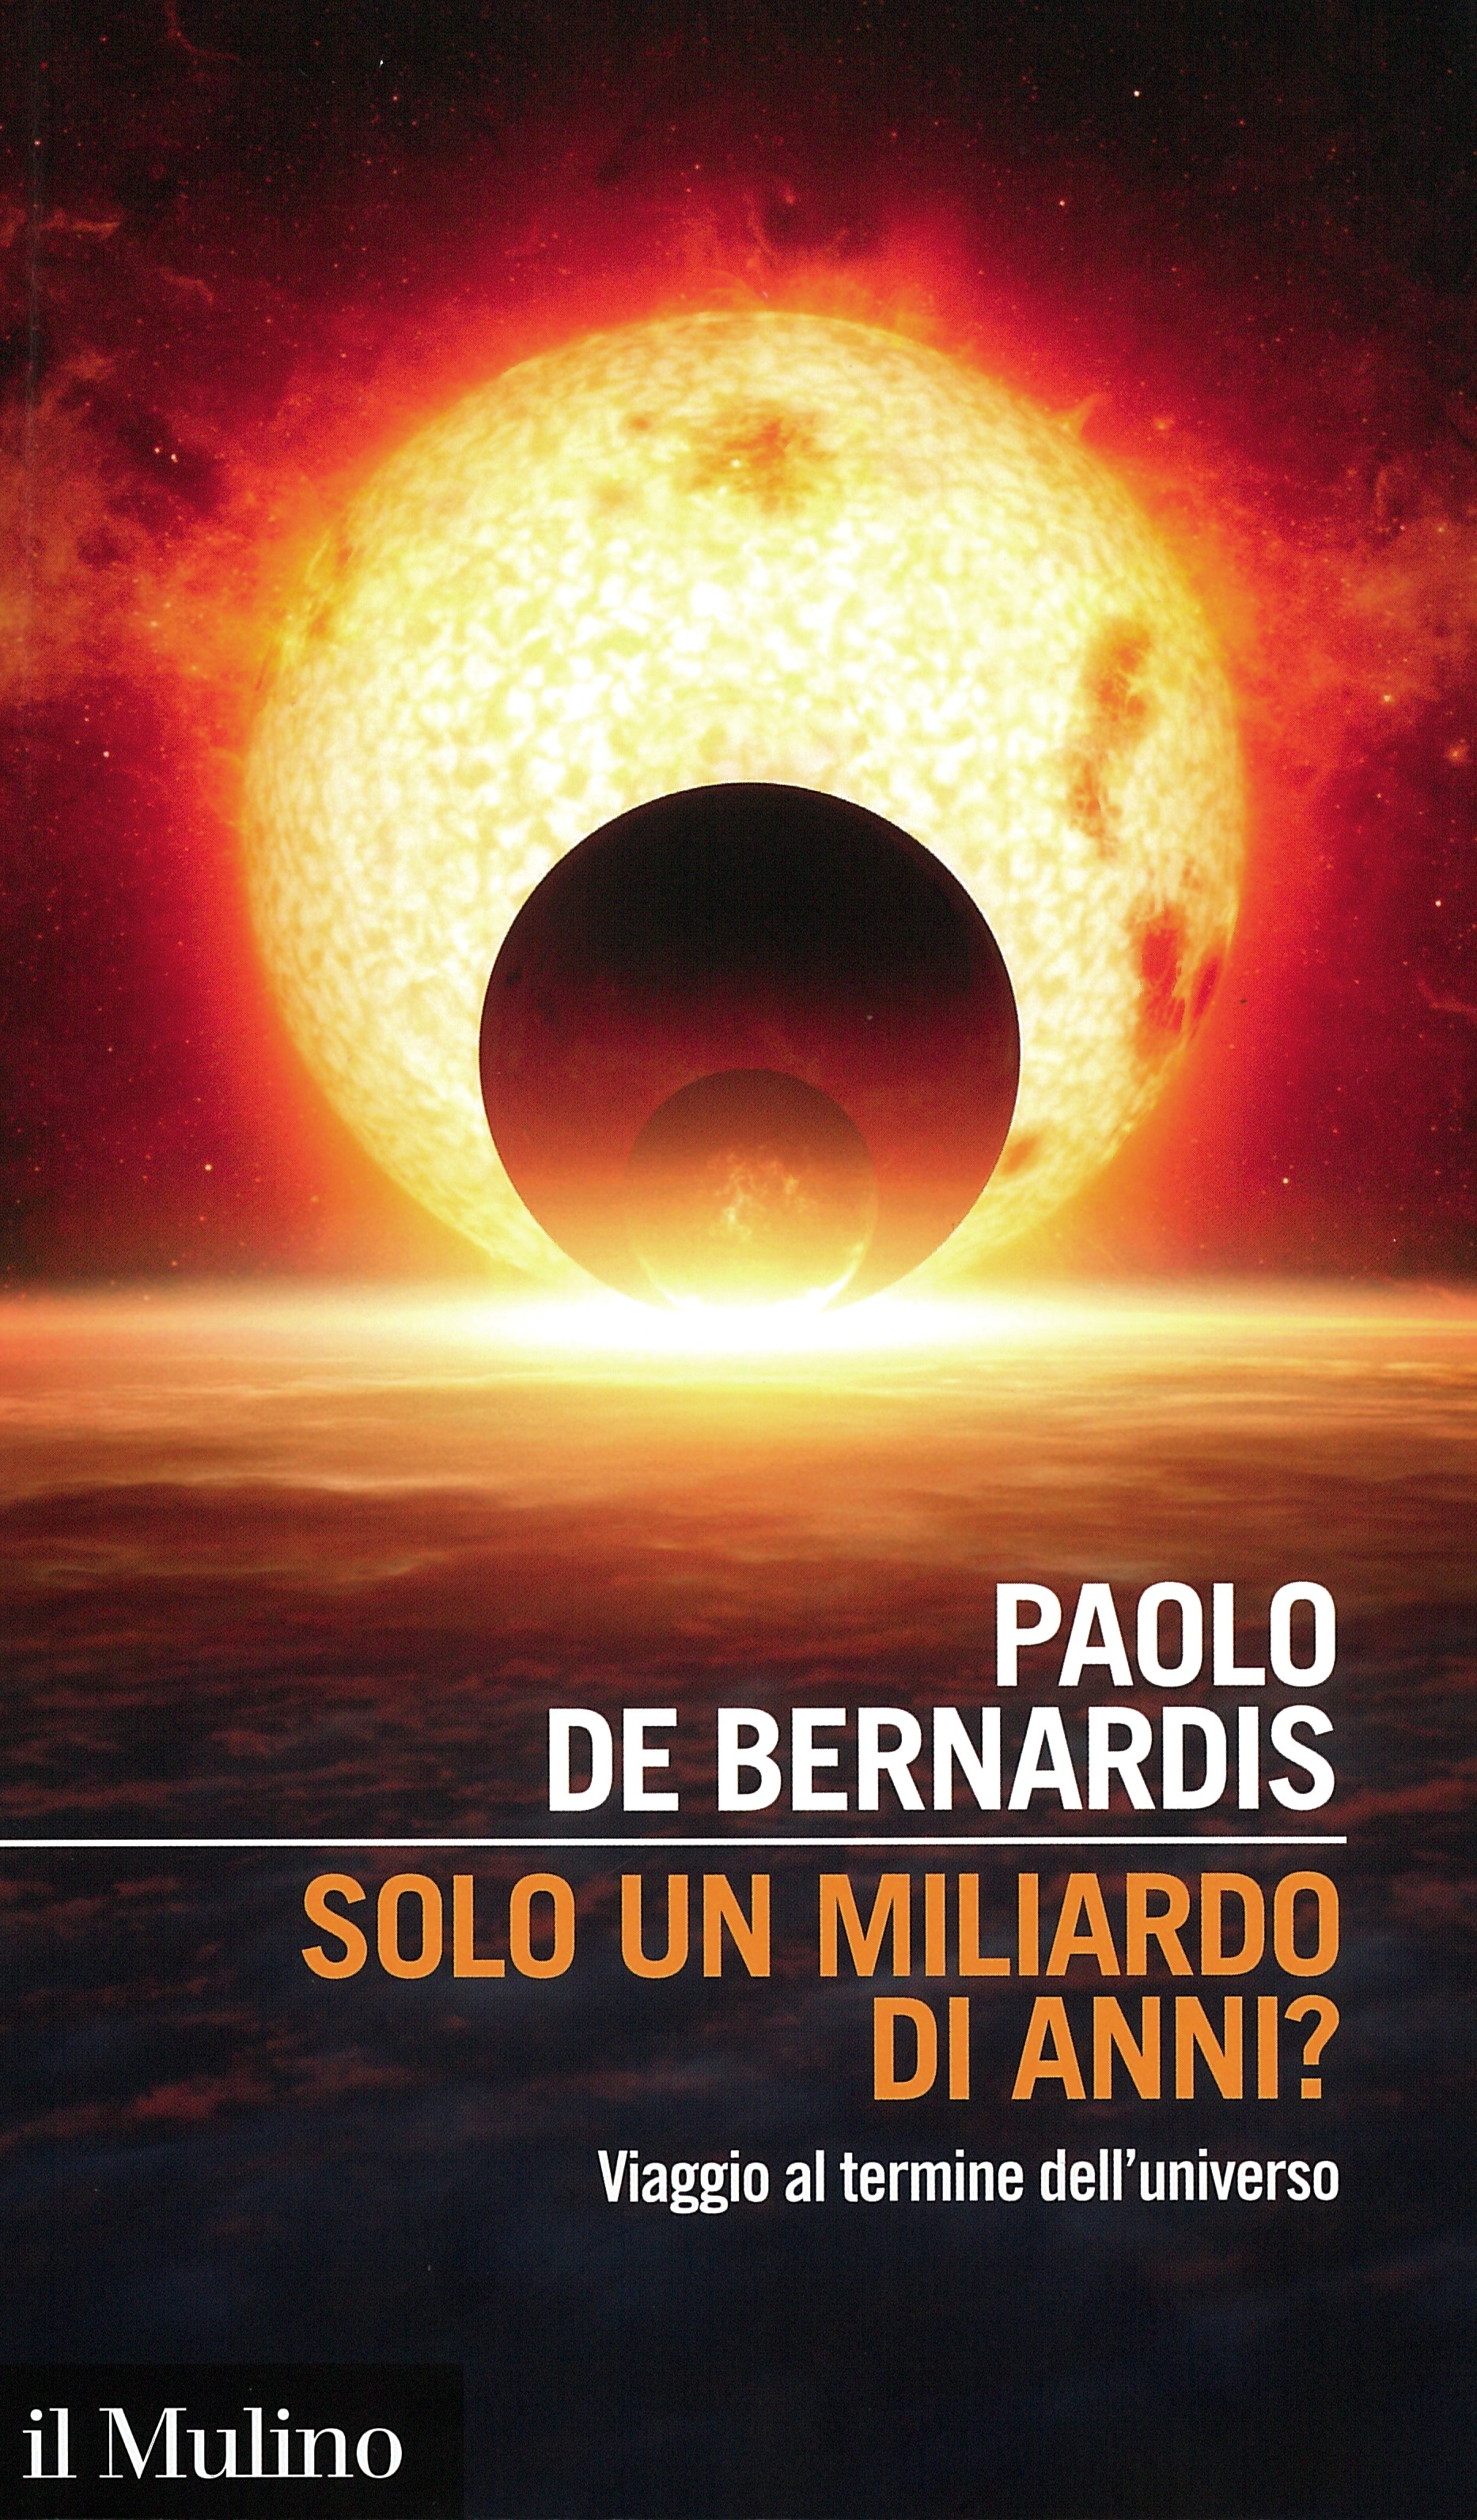 Read more about the article ‘Only one billion years? A journey to the end of the universe’ by Paolo De Bernardis